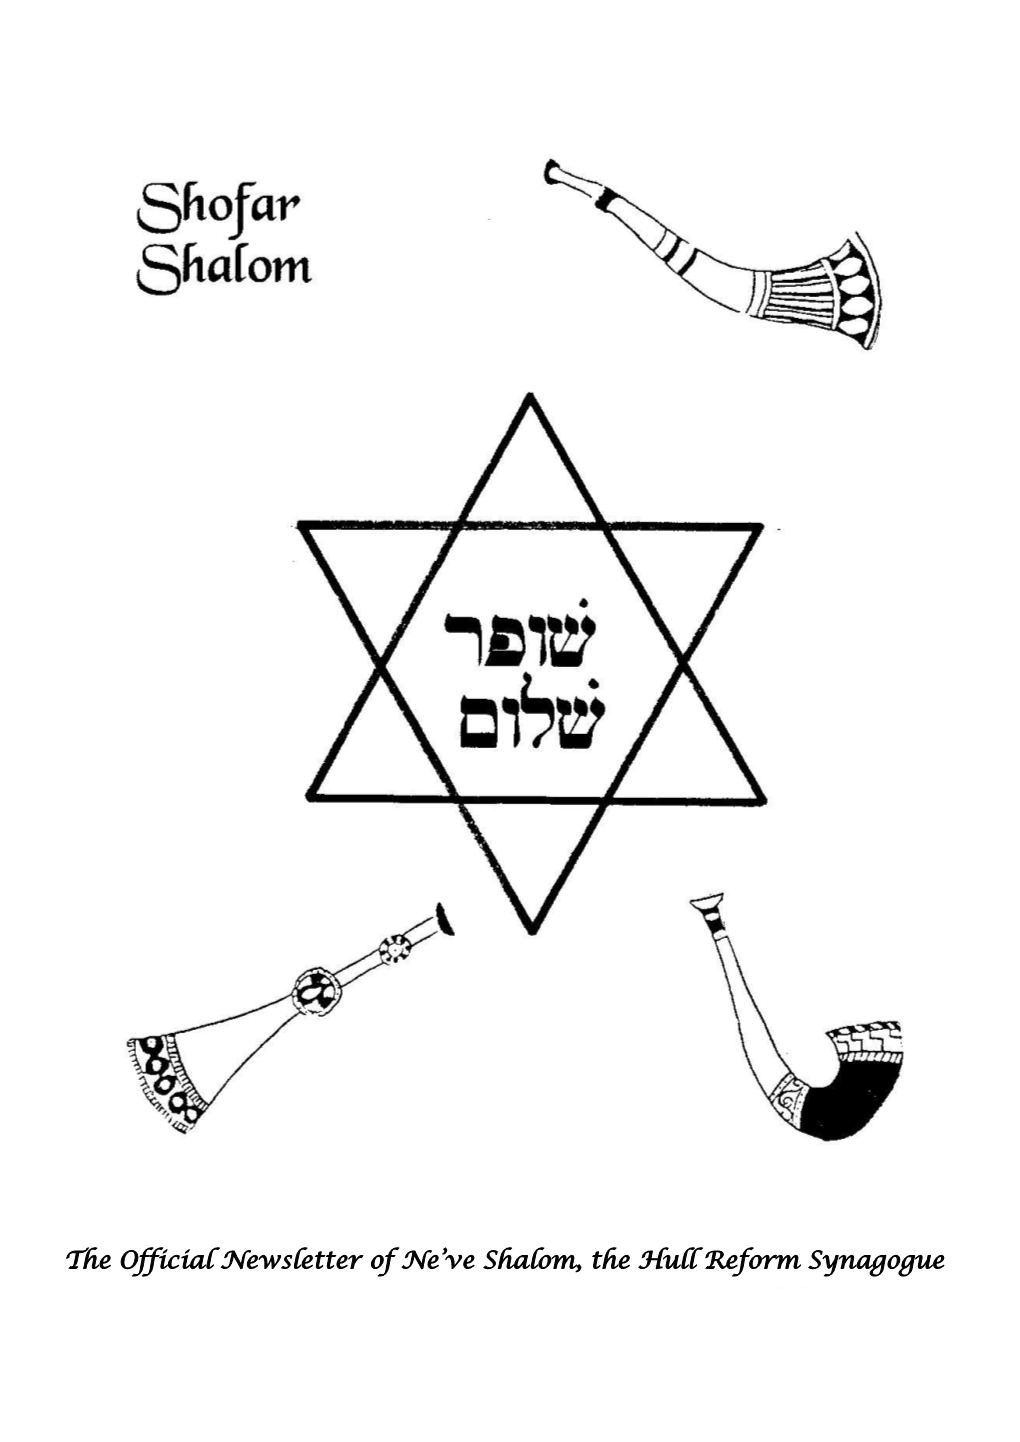 The Official Newsletter of Ne've Shalom, the Hull Reform Synagogue